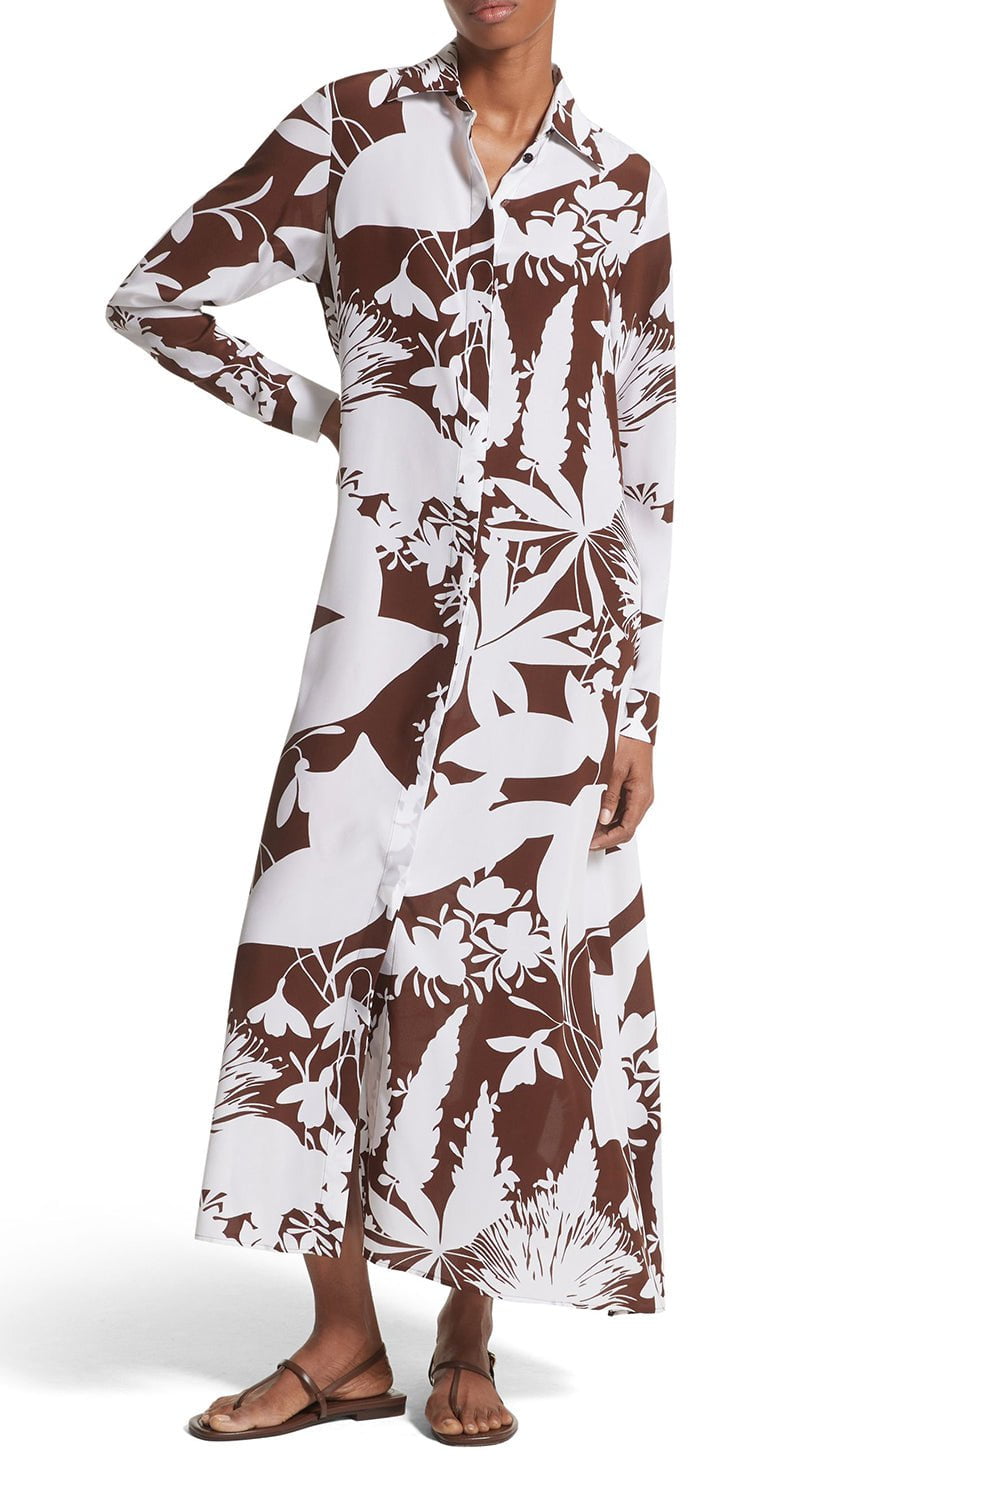 Shadow Floral Caftan CLOTHINGDRESSCASUAL MICHAEL KORS COLLECTION   